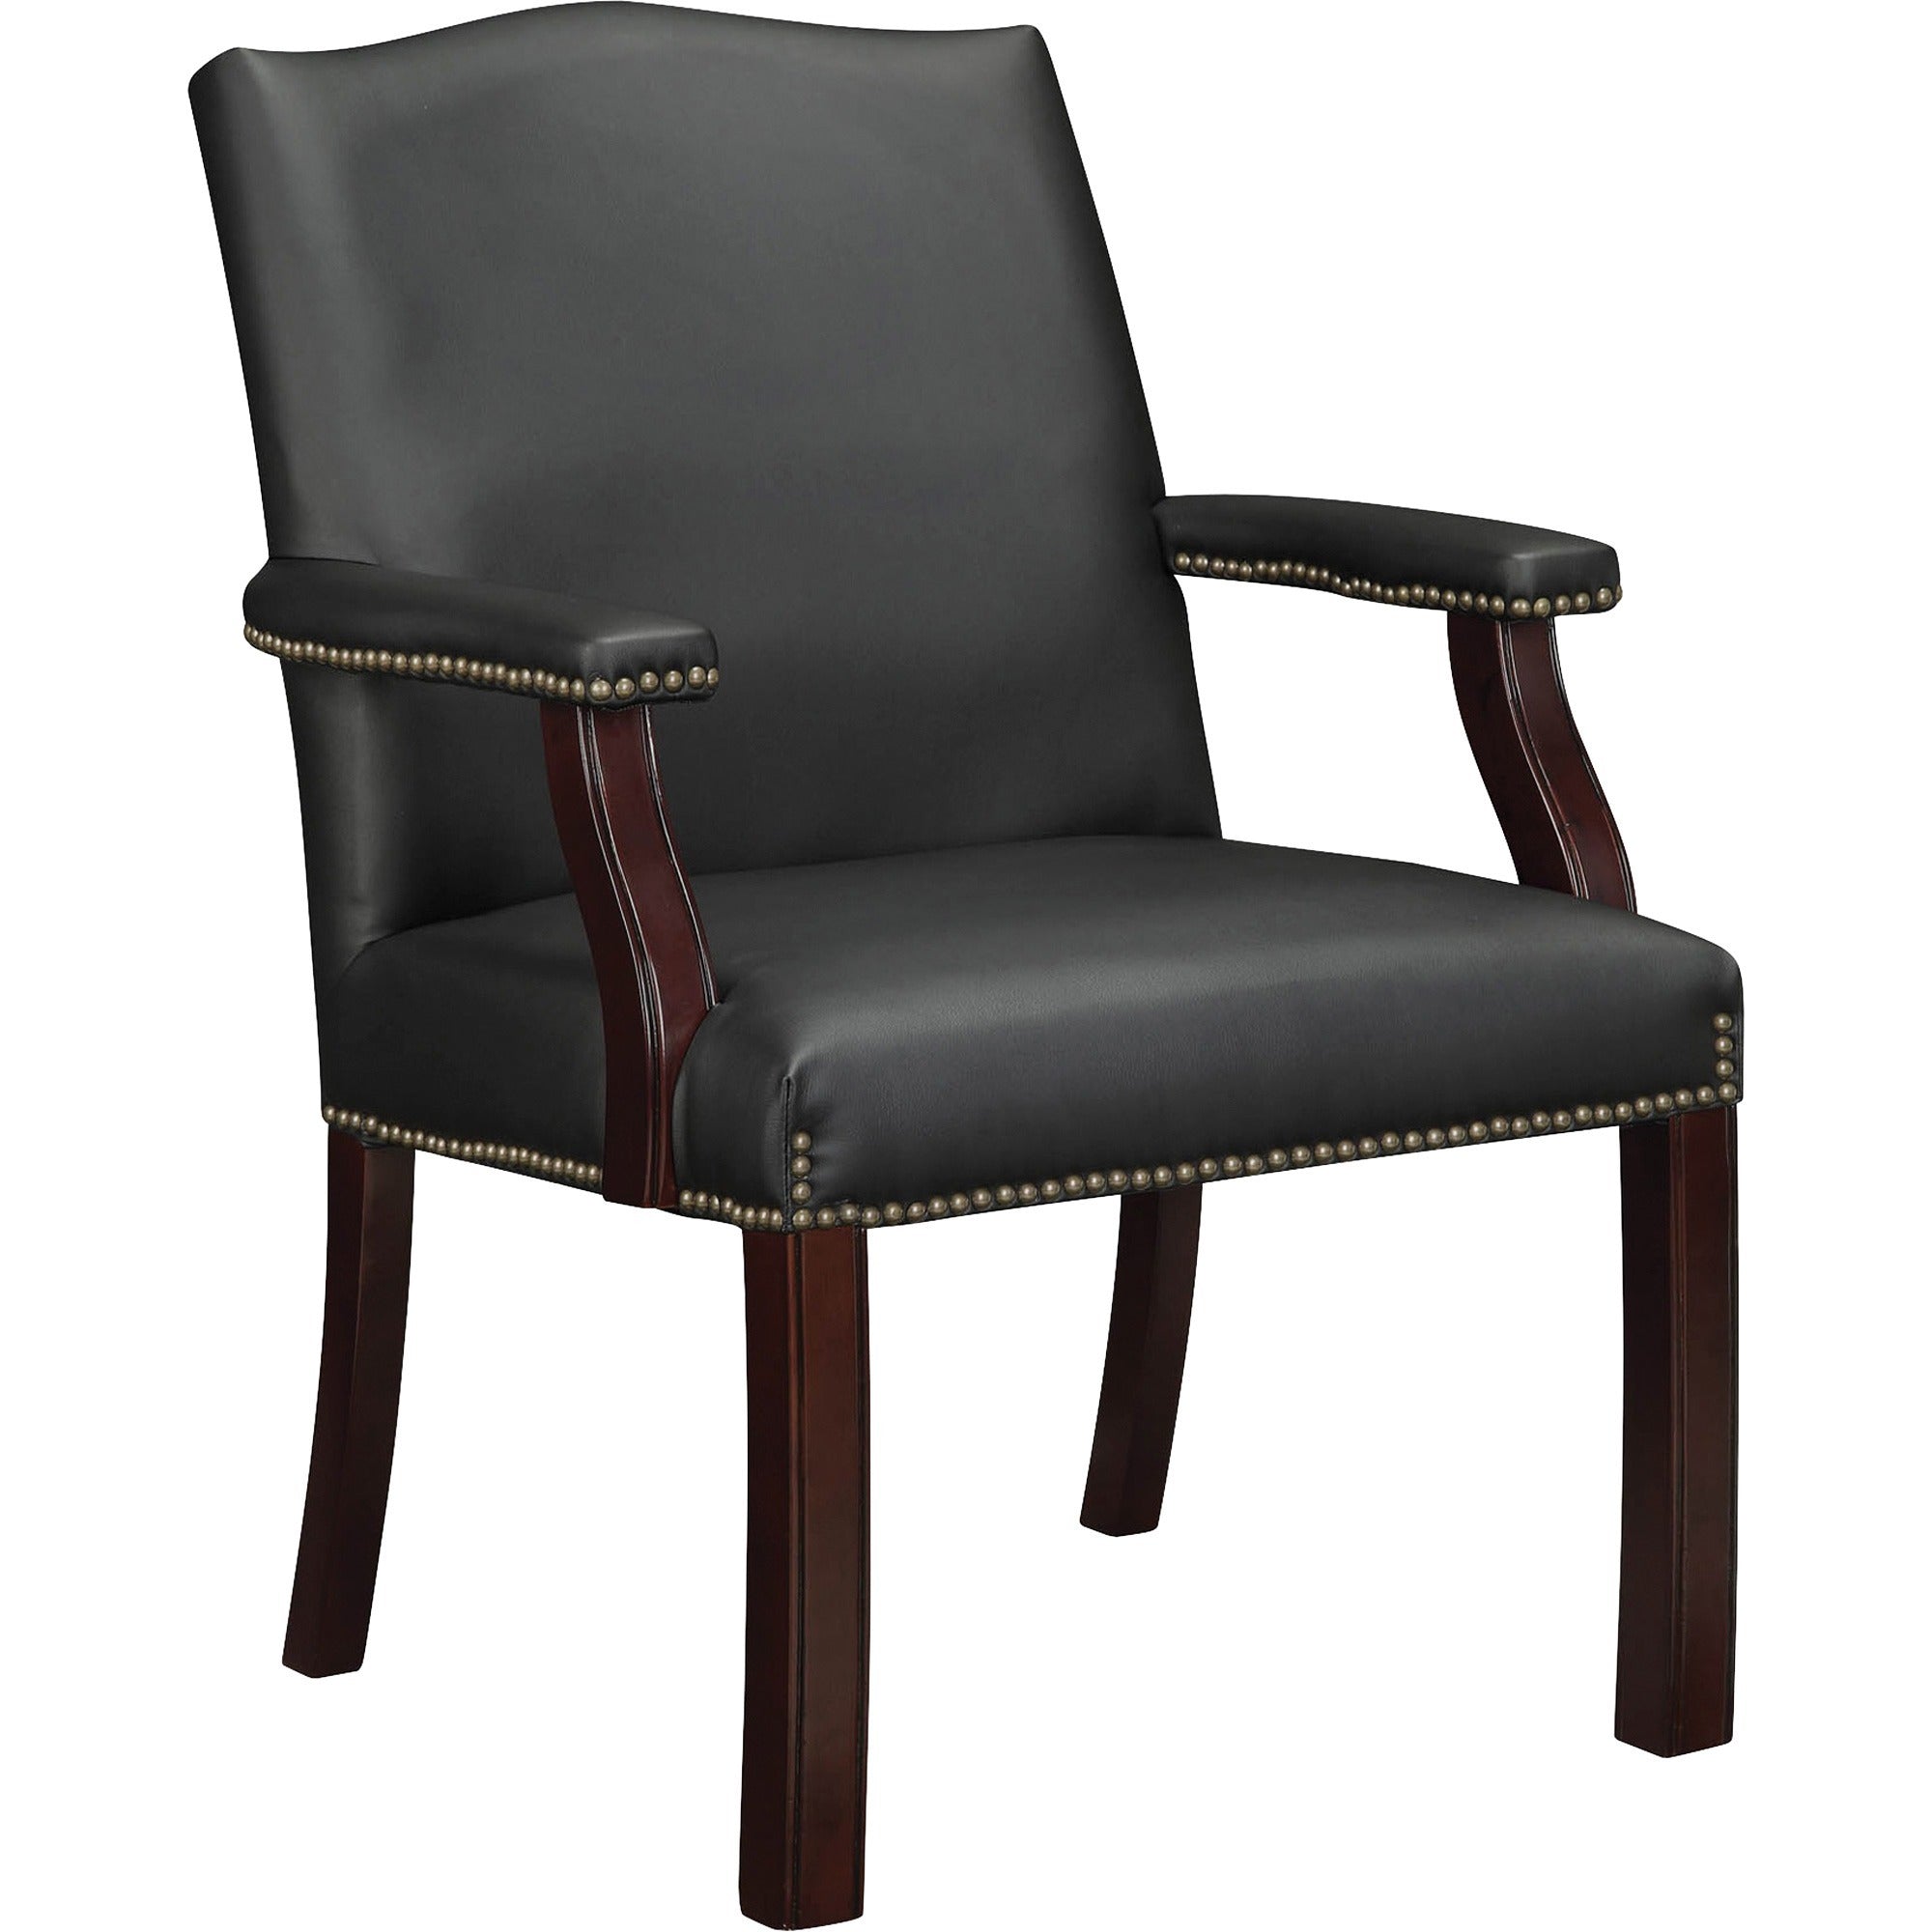 Lorell Deluxe Guest Chair - Black Bonded Leather Seat - Black Bonded Leather Back - Four-legged Base - Black - 1 Each - 